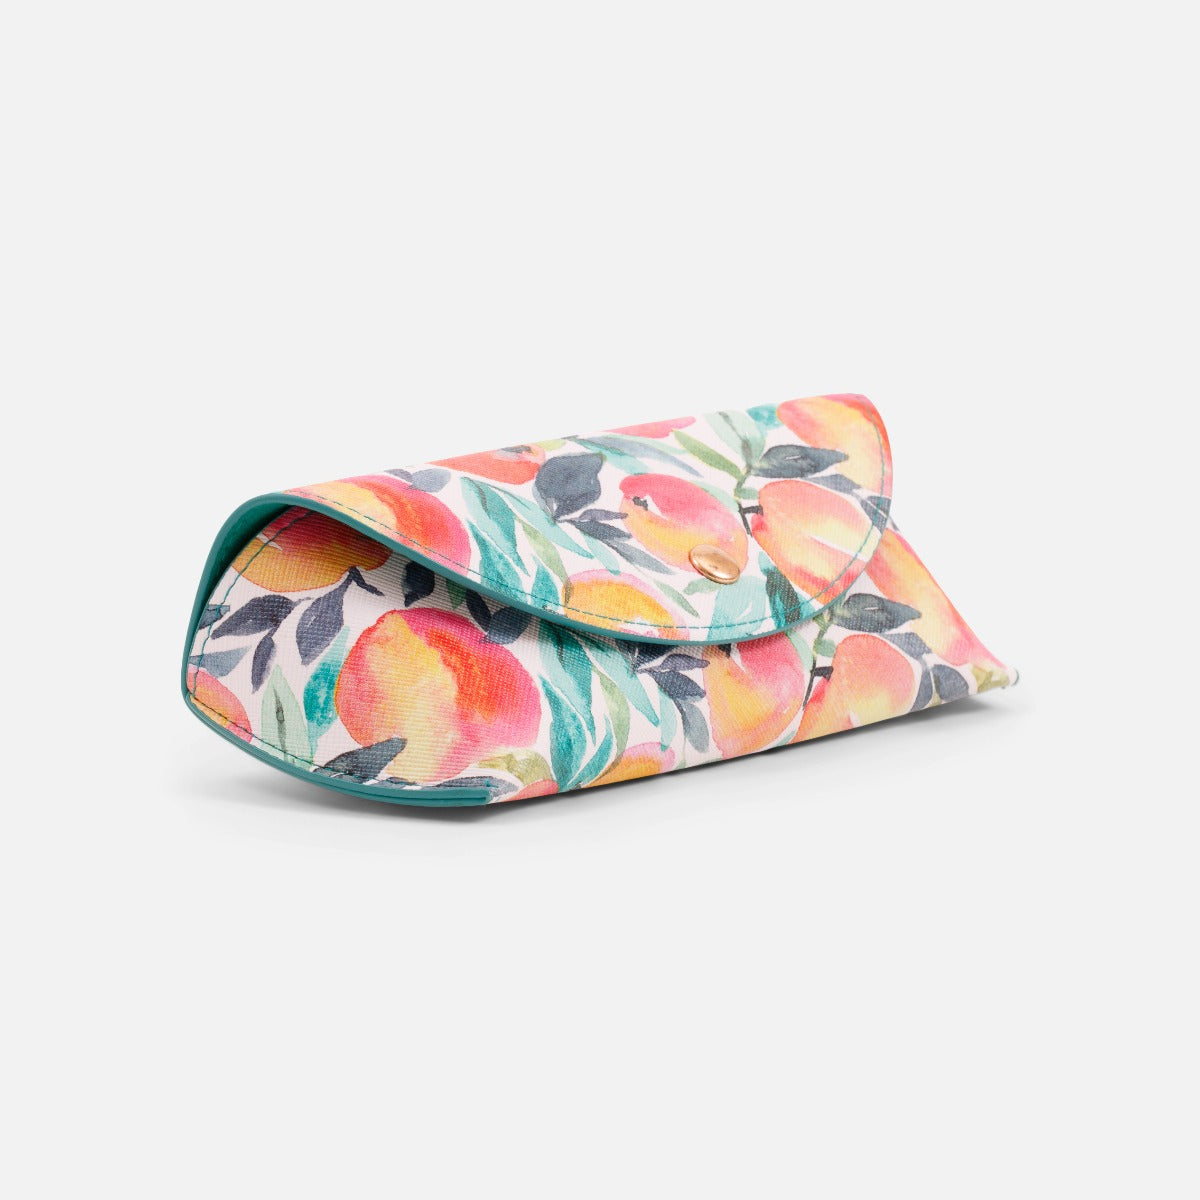 Glasses case with peach print